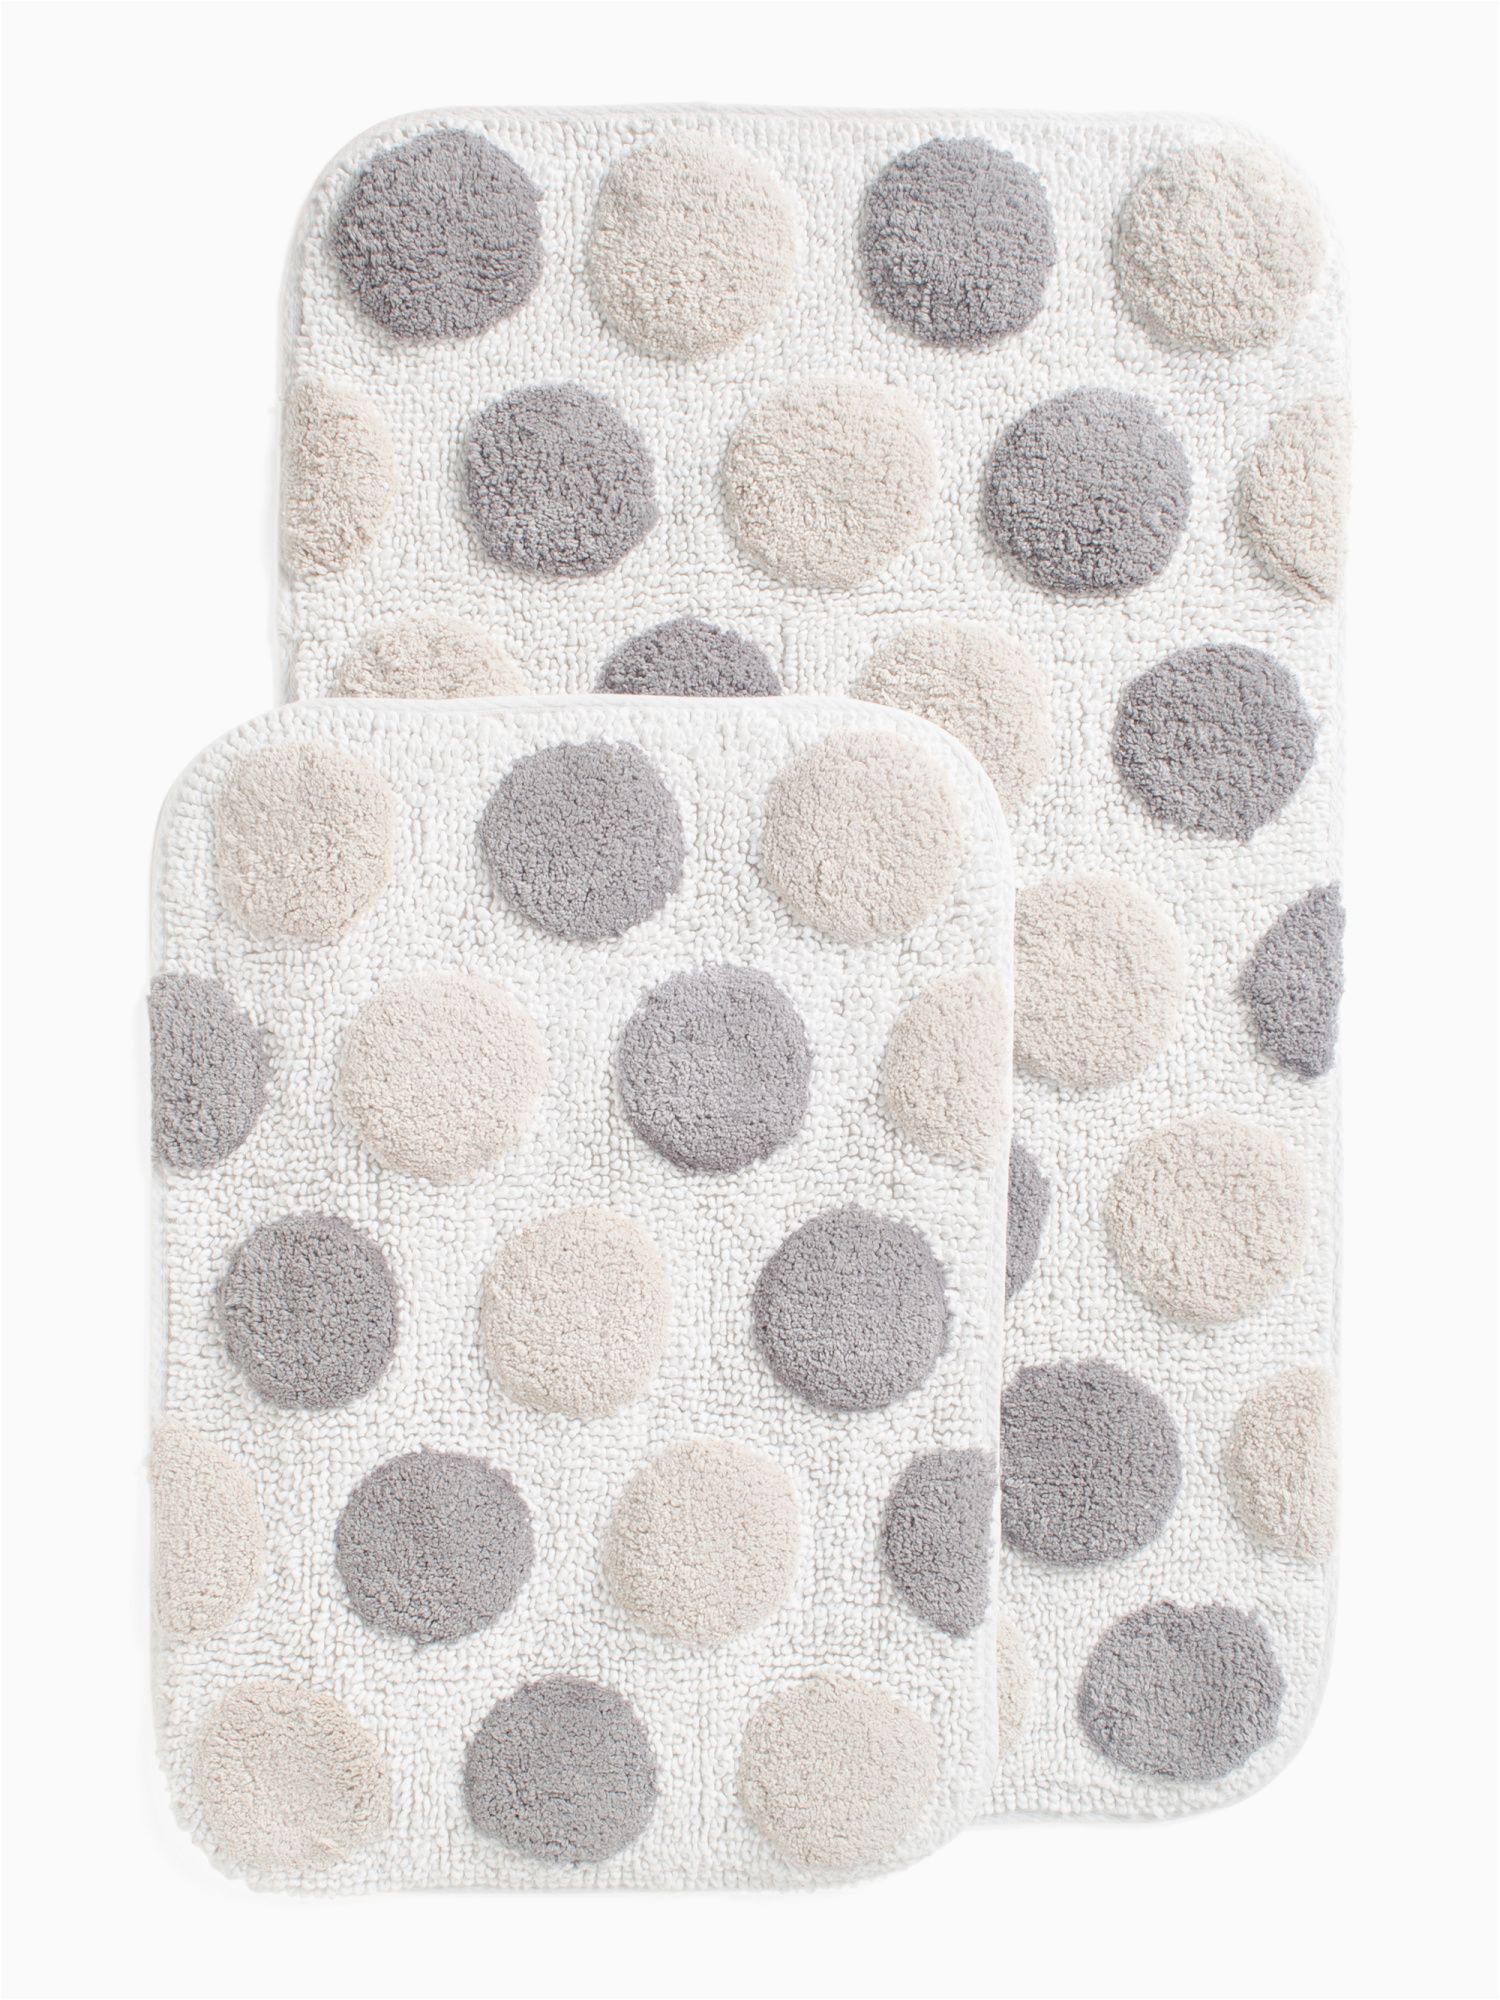 Double Sided Bathroom Rugs Made In India Big Dot Rugs